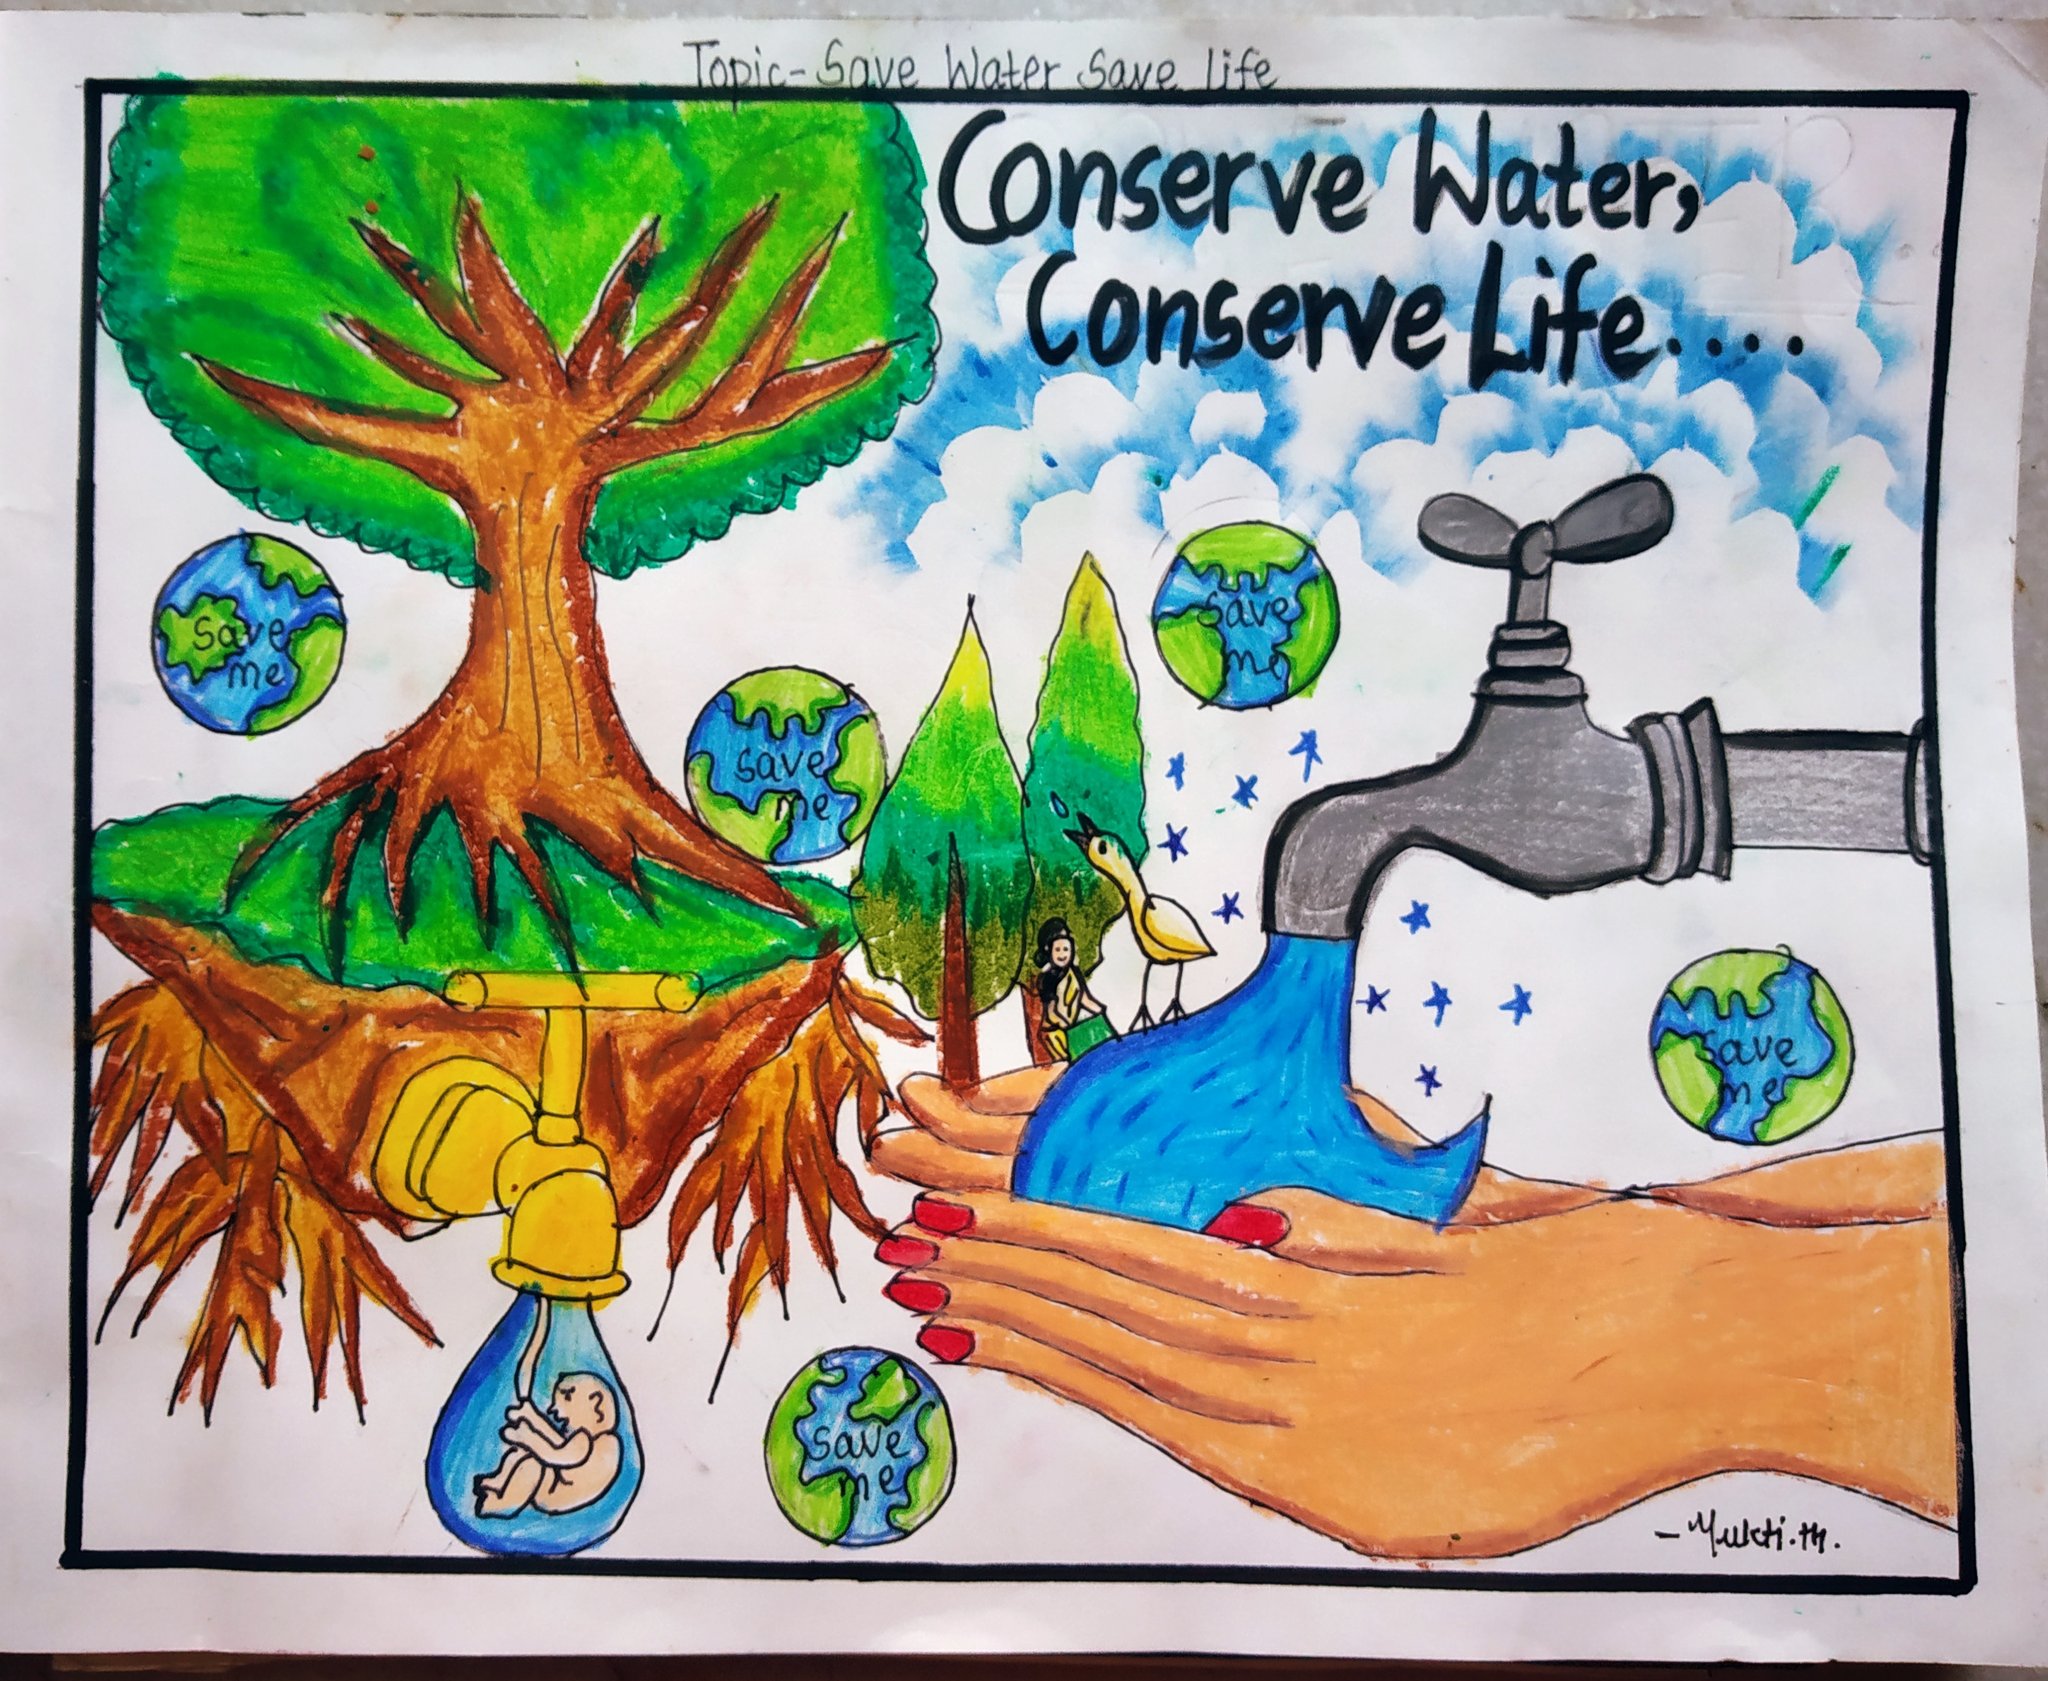 Water bottle design with earth image and global warming theme on Craiyon